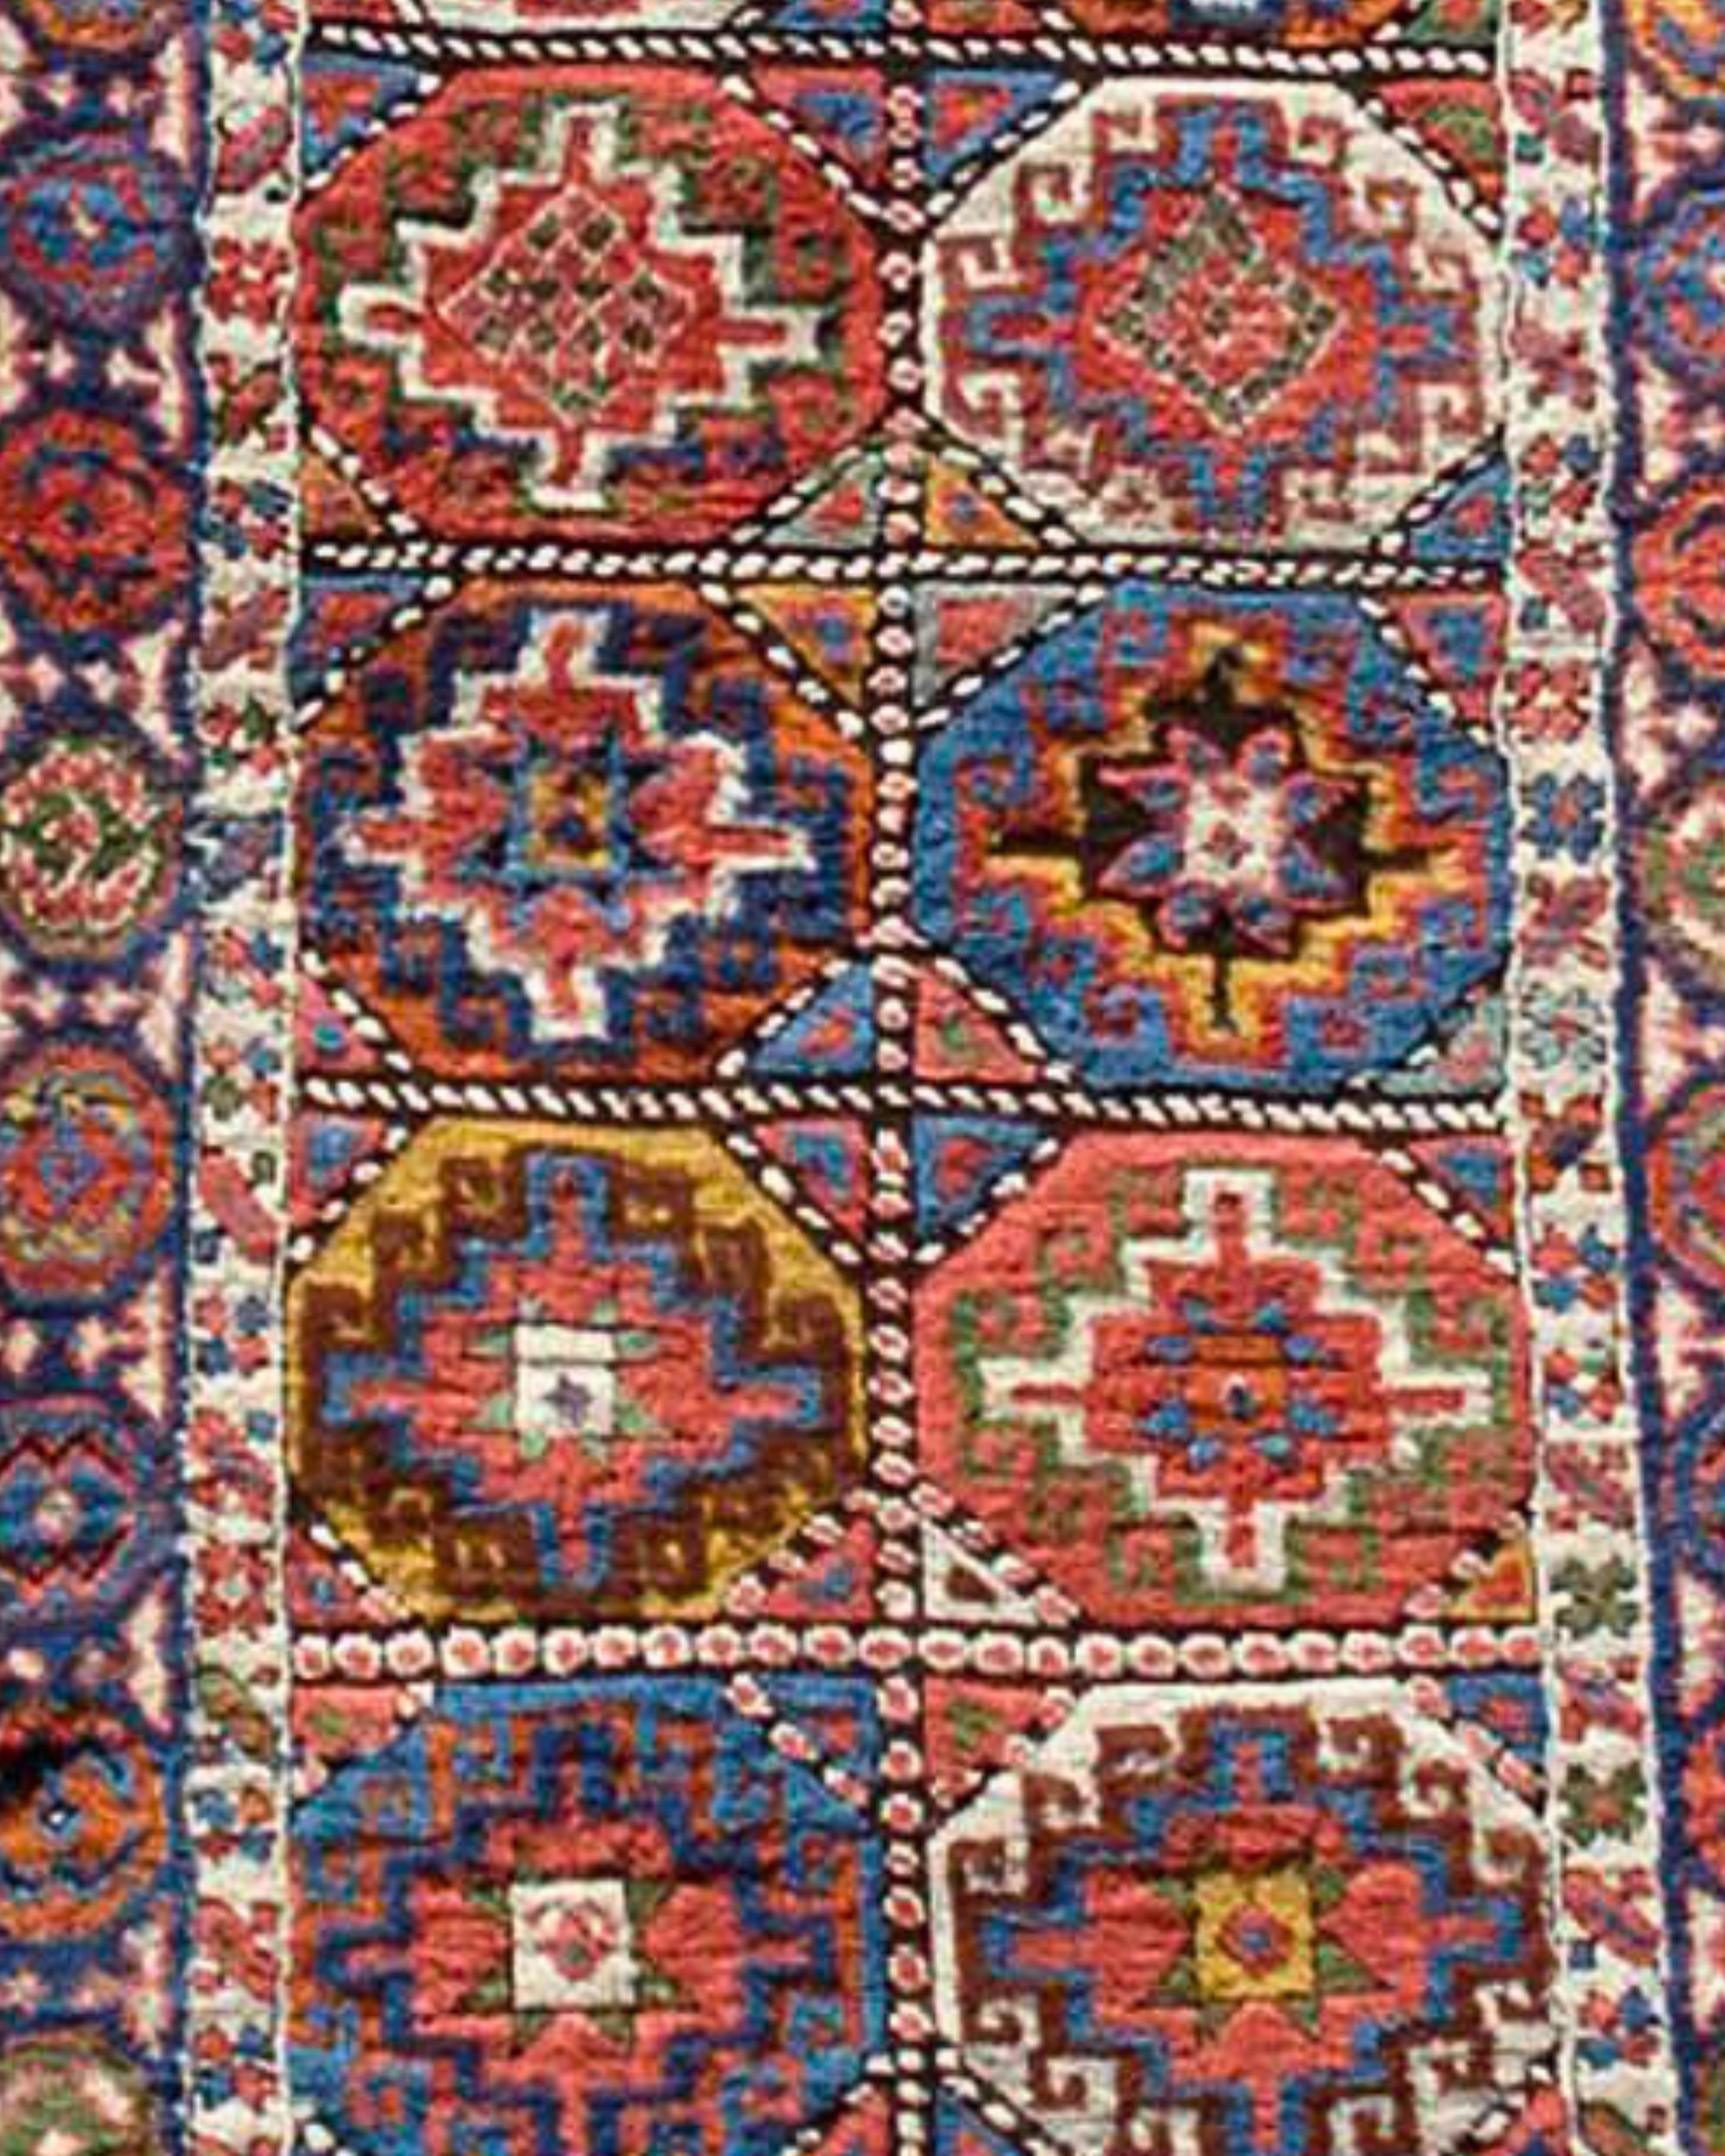 Antique Persian Shahsevan Runner Rug, 19th Century

Additional Information:
Dimensions: 3'5